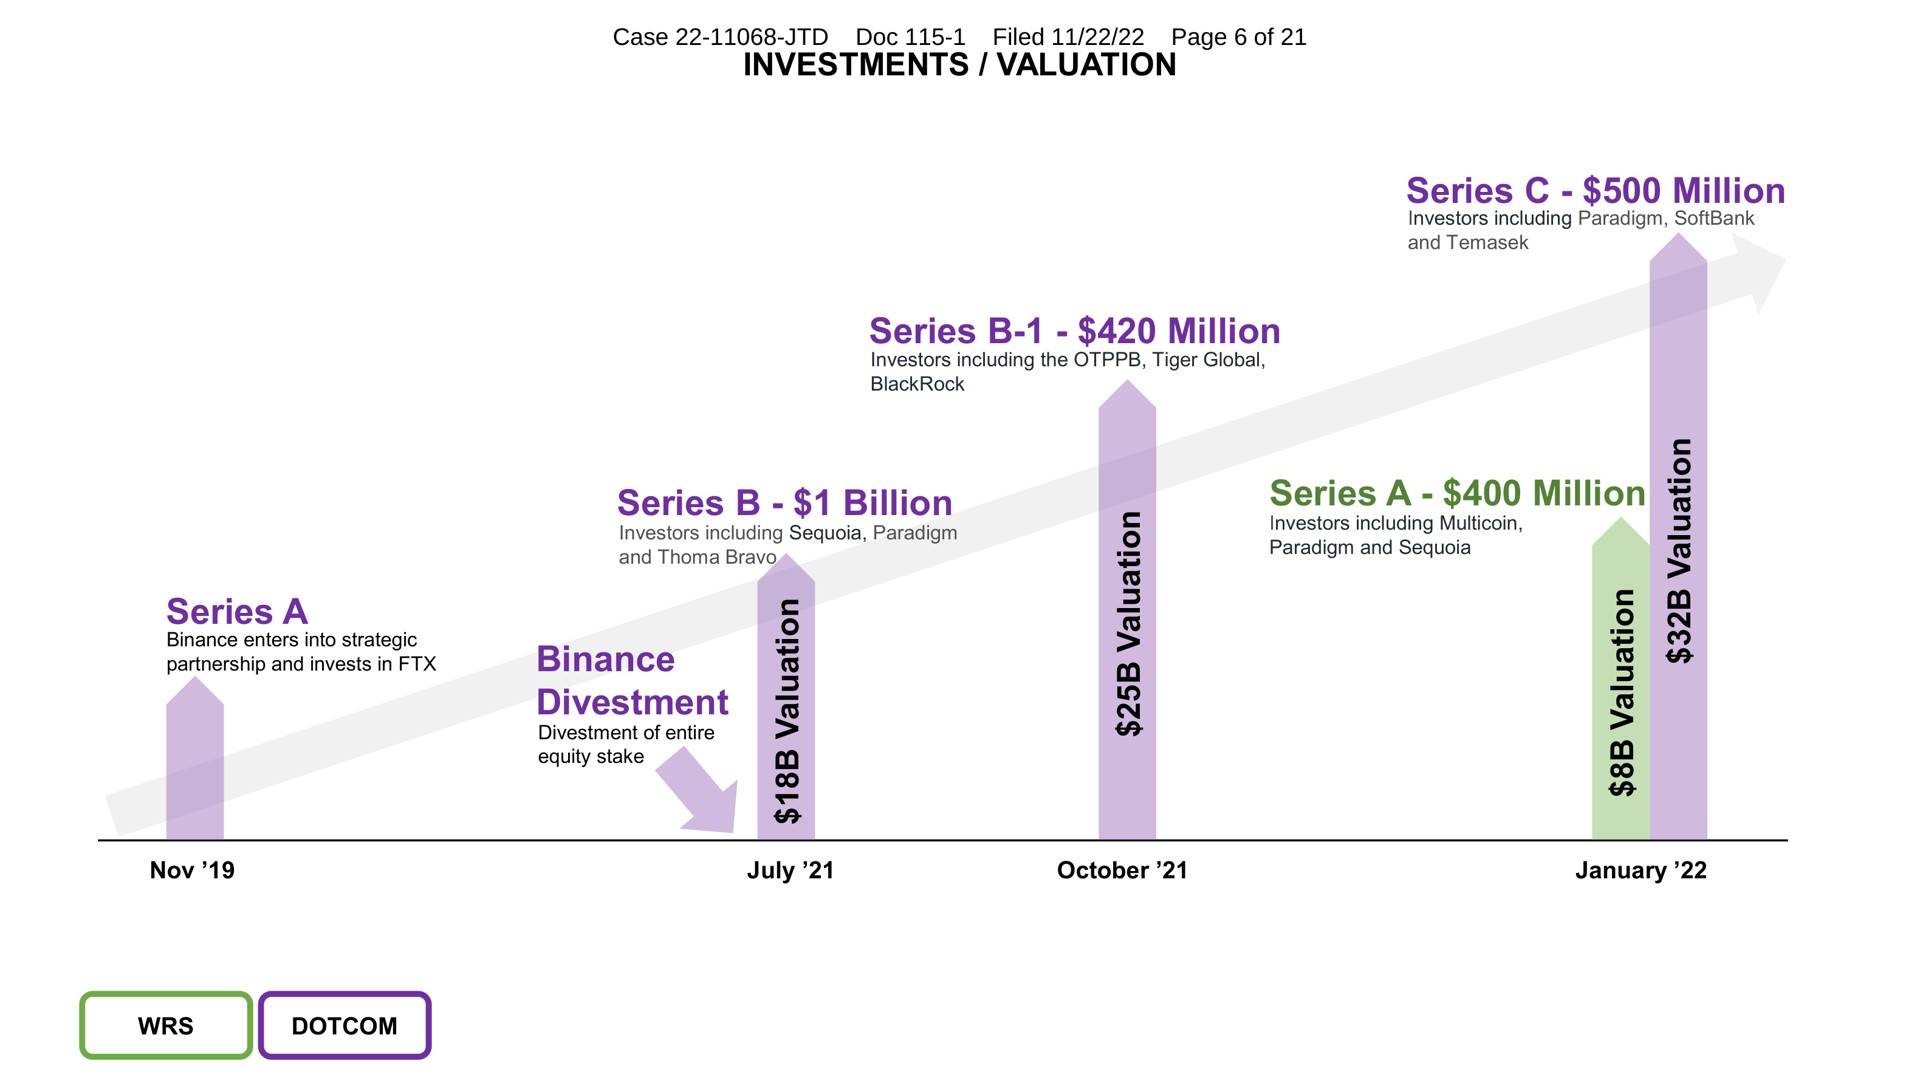 investments valuation series million series million series billion divestment series a million series a case doc filed page of sags | FTX Trading